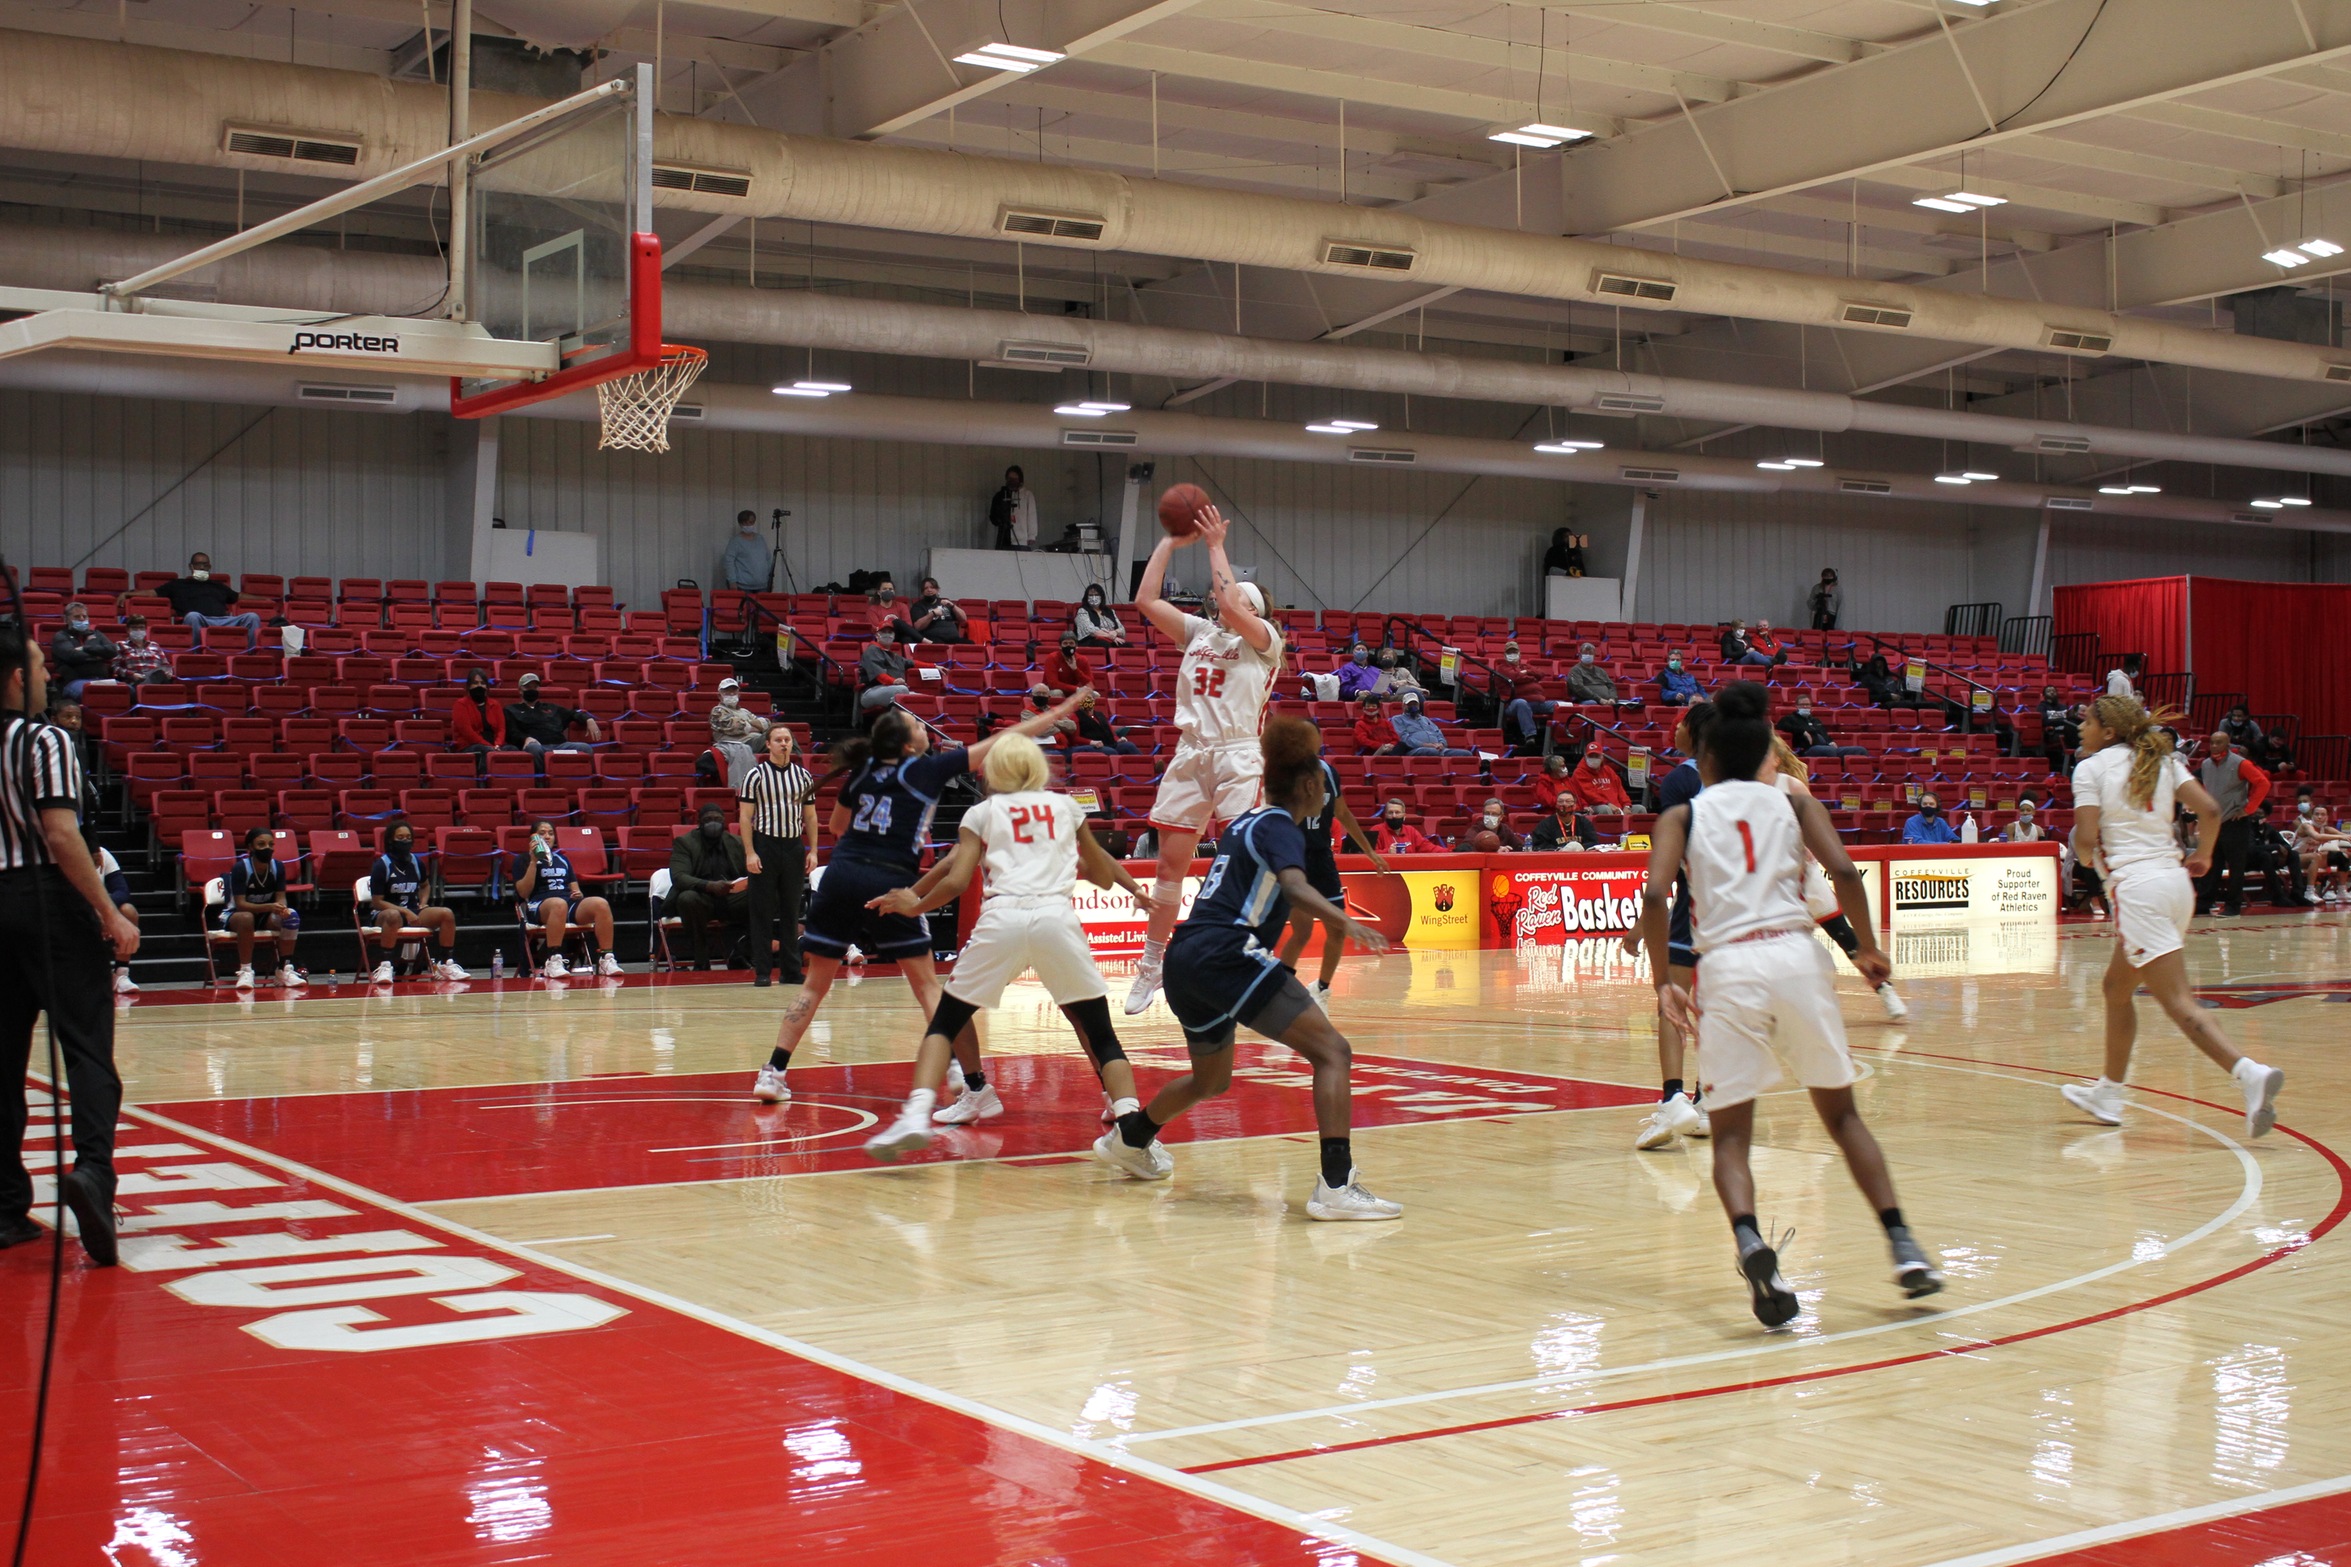 In a Tight Fourth Quarter, Raven Women Hold On to Edge Colby 49-47